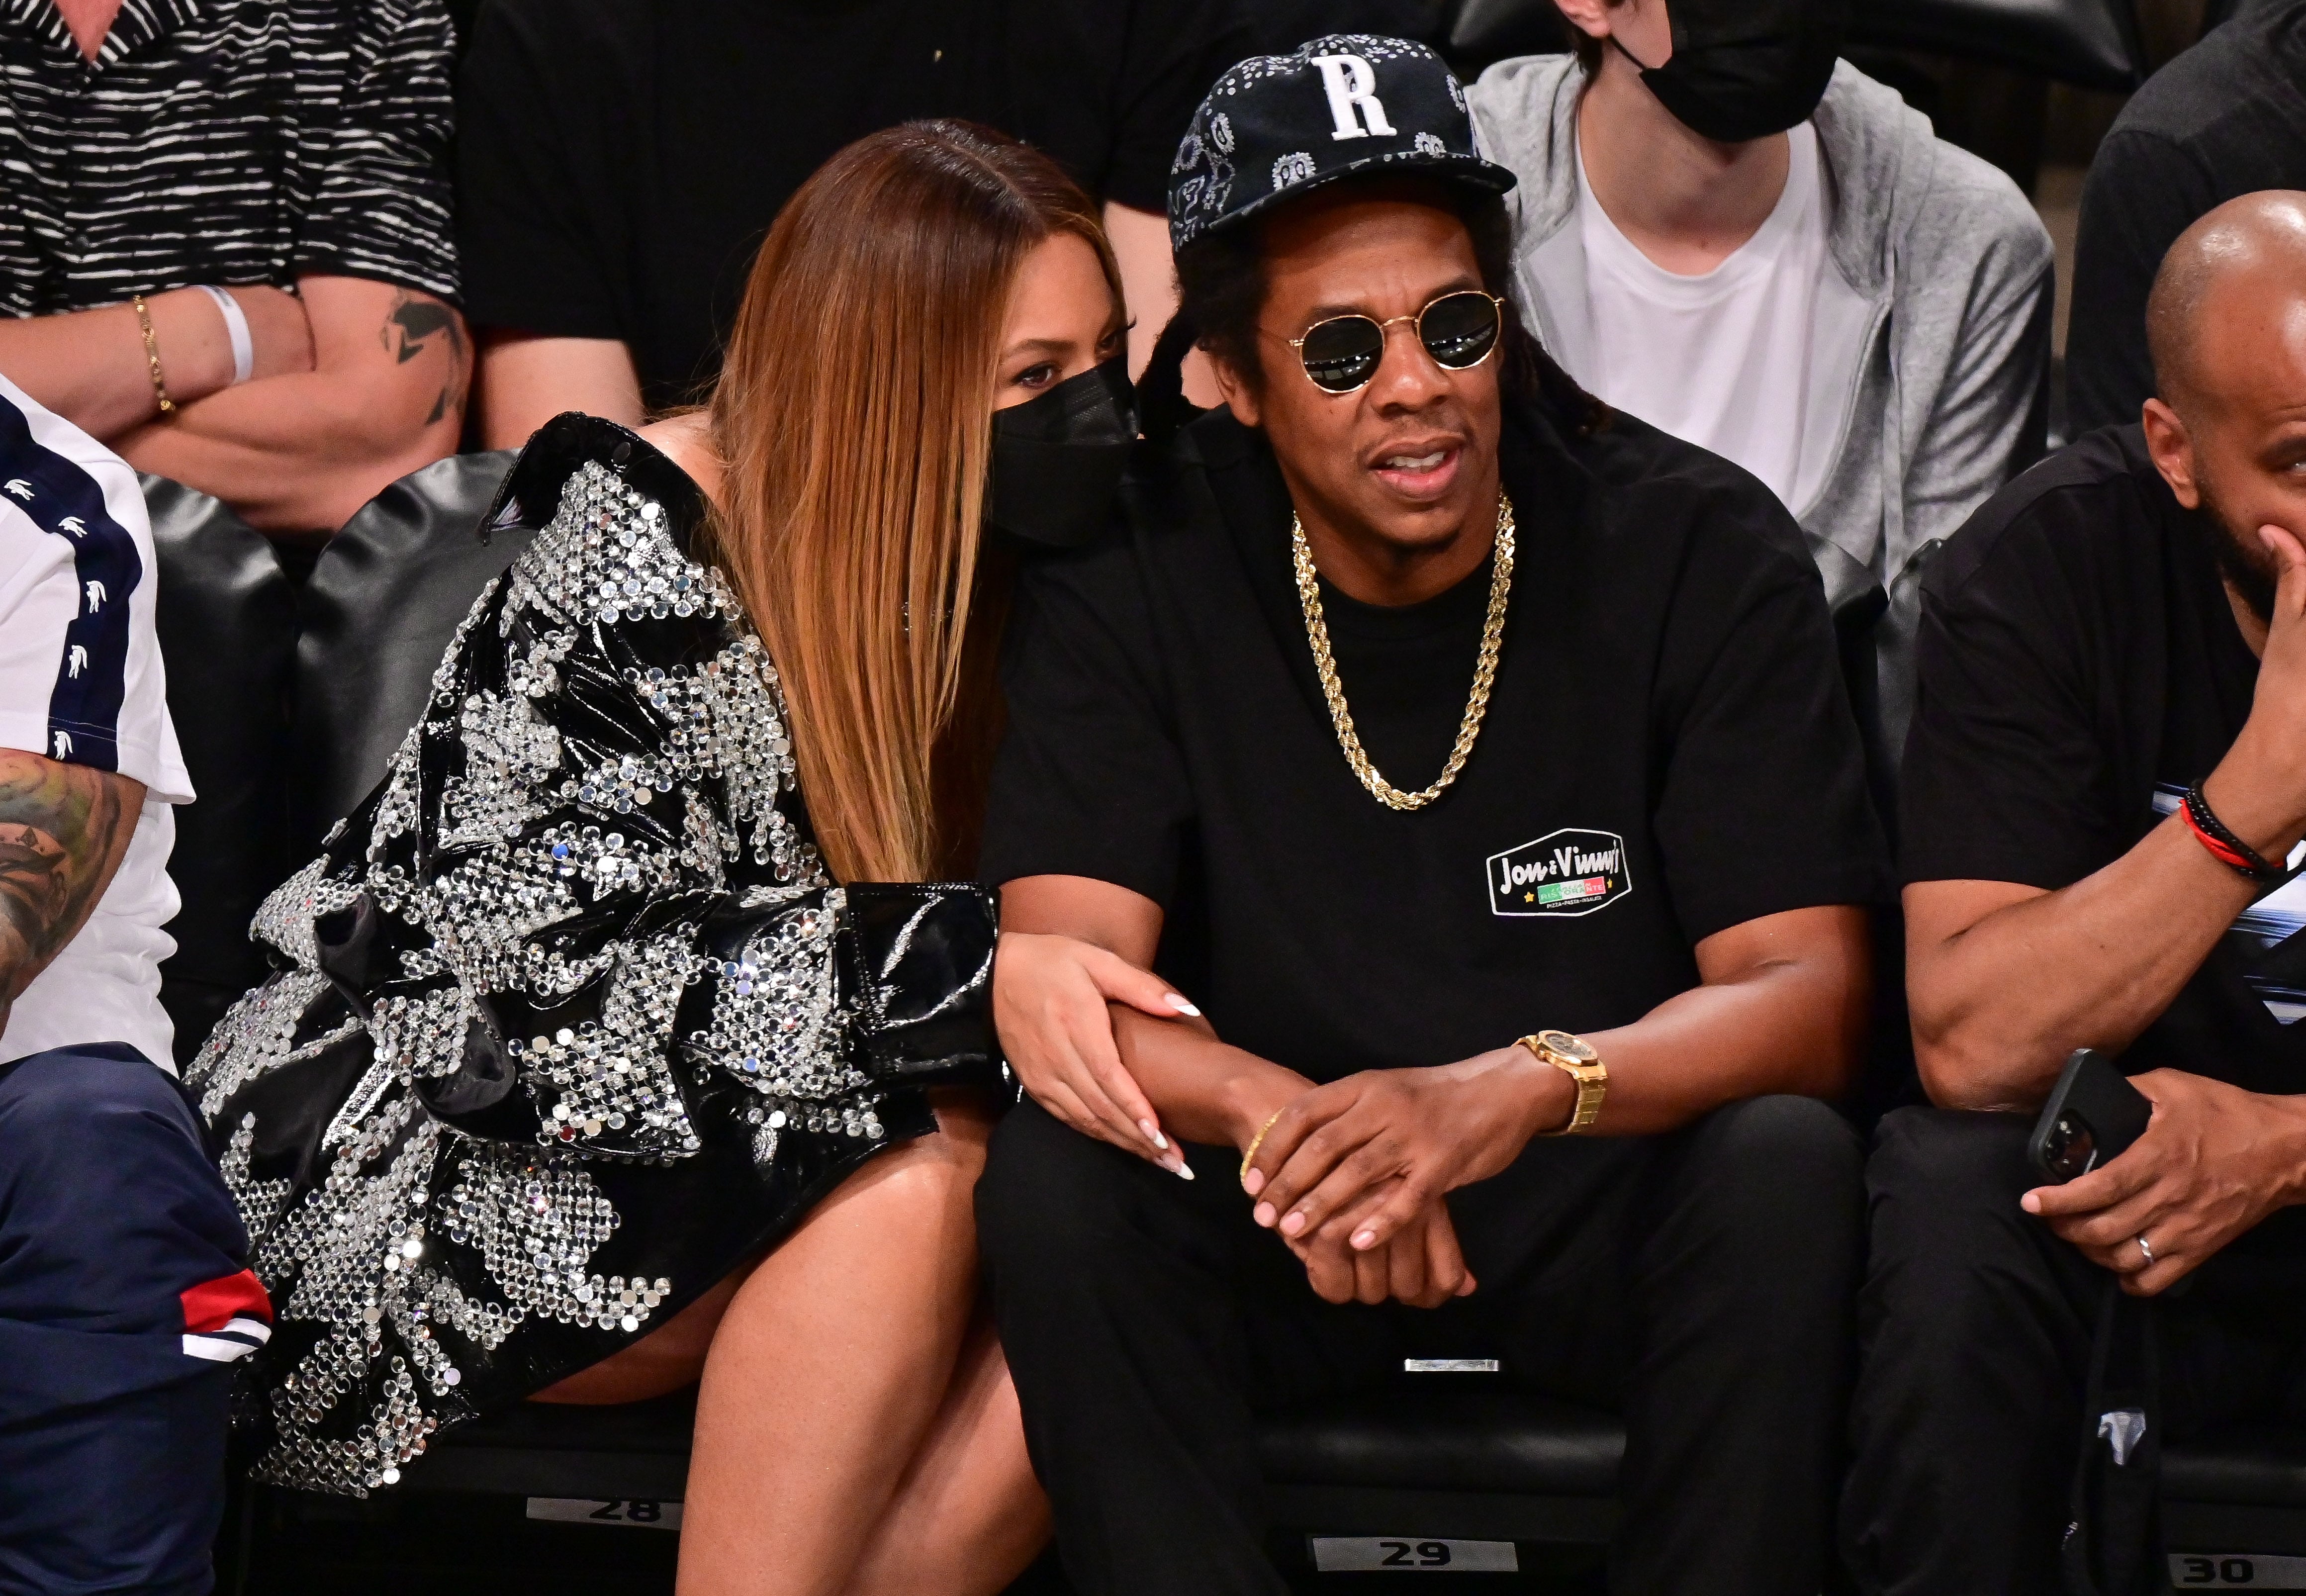 Did Beyoncé Borrow Jay-Z's Clothes For Their Date Night?